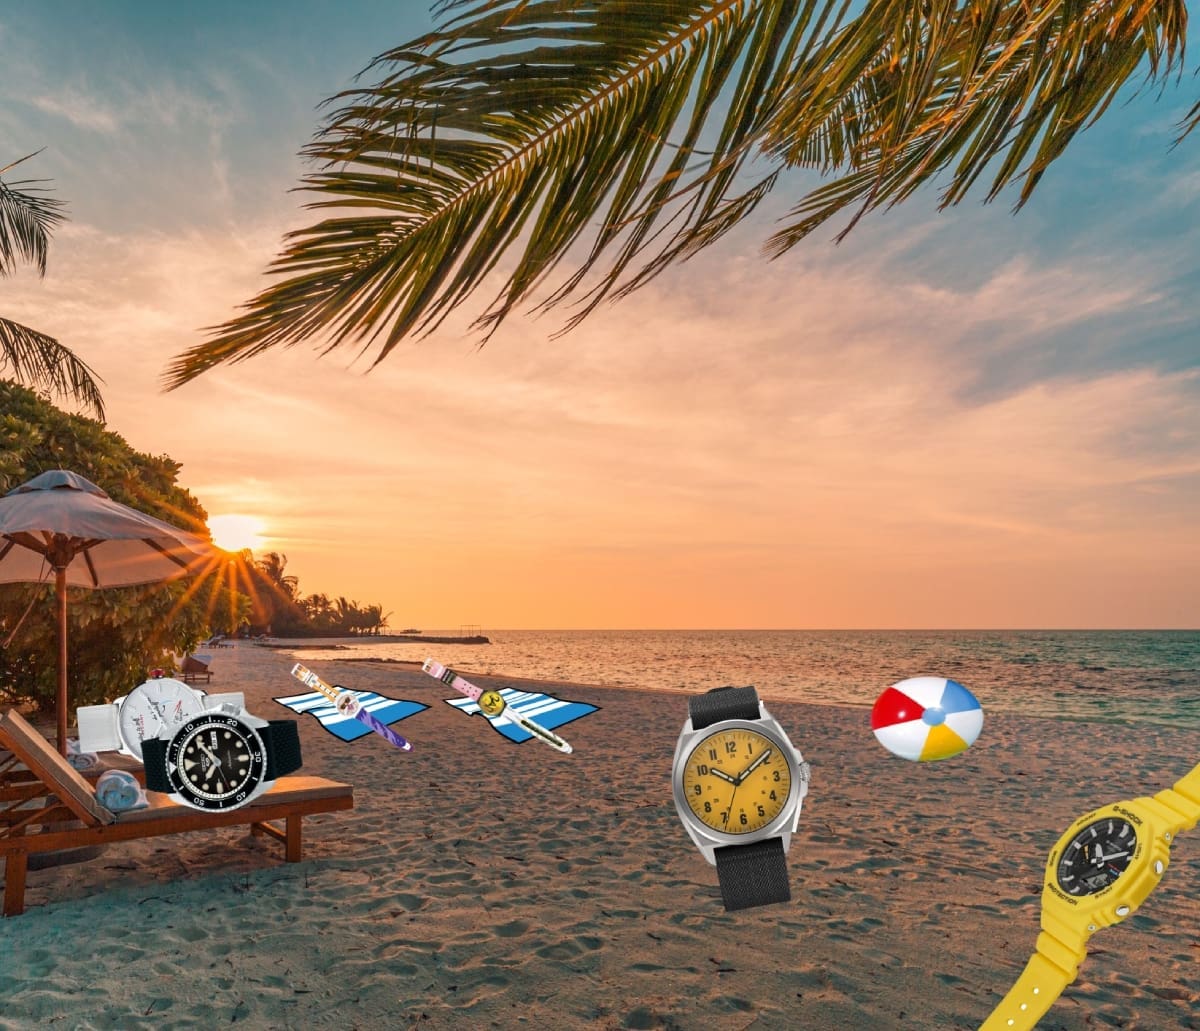 Cheap and cheerful – 5 affordable summer watches